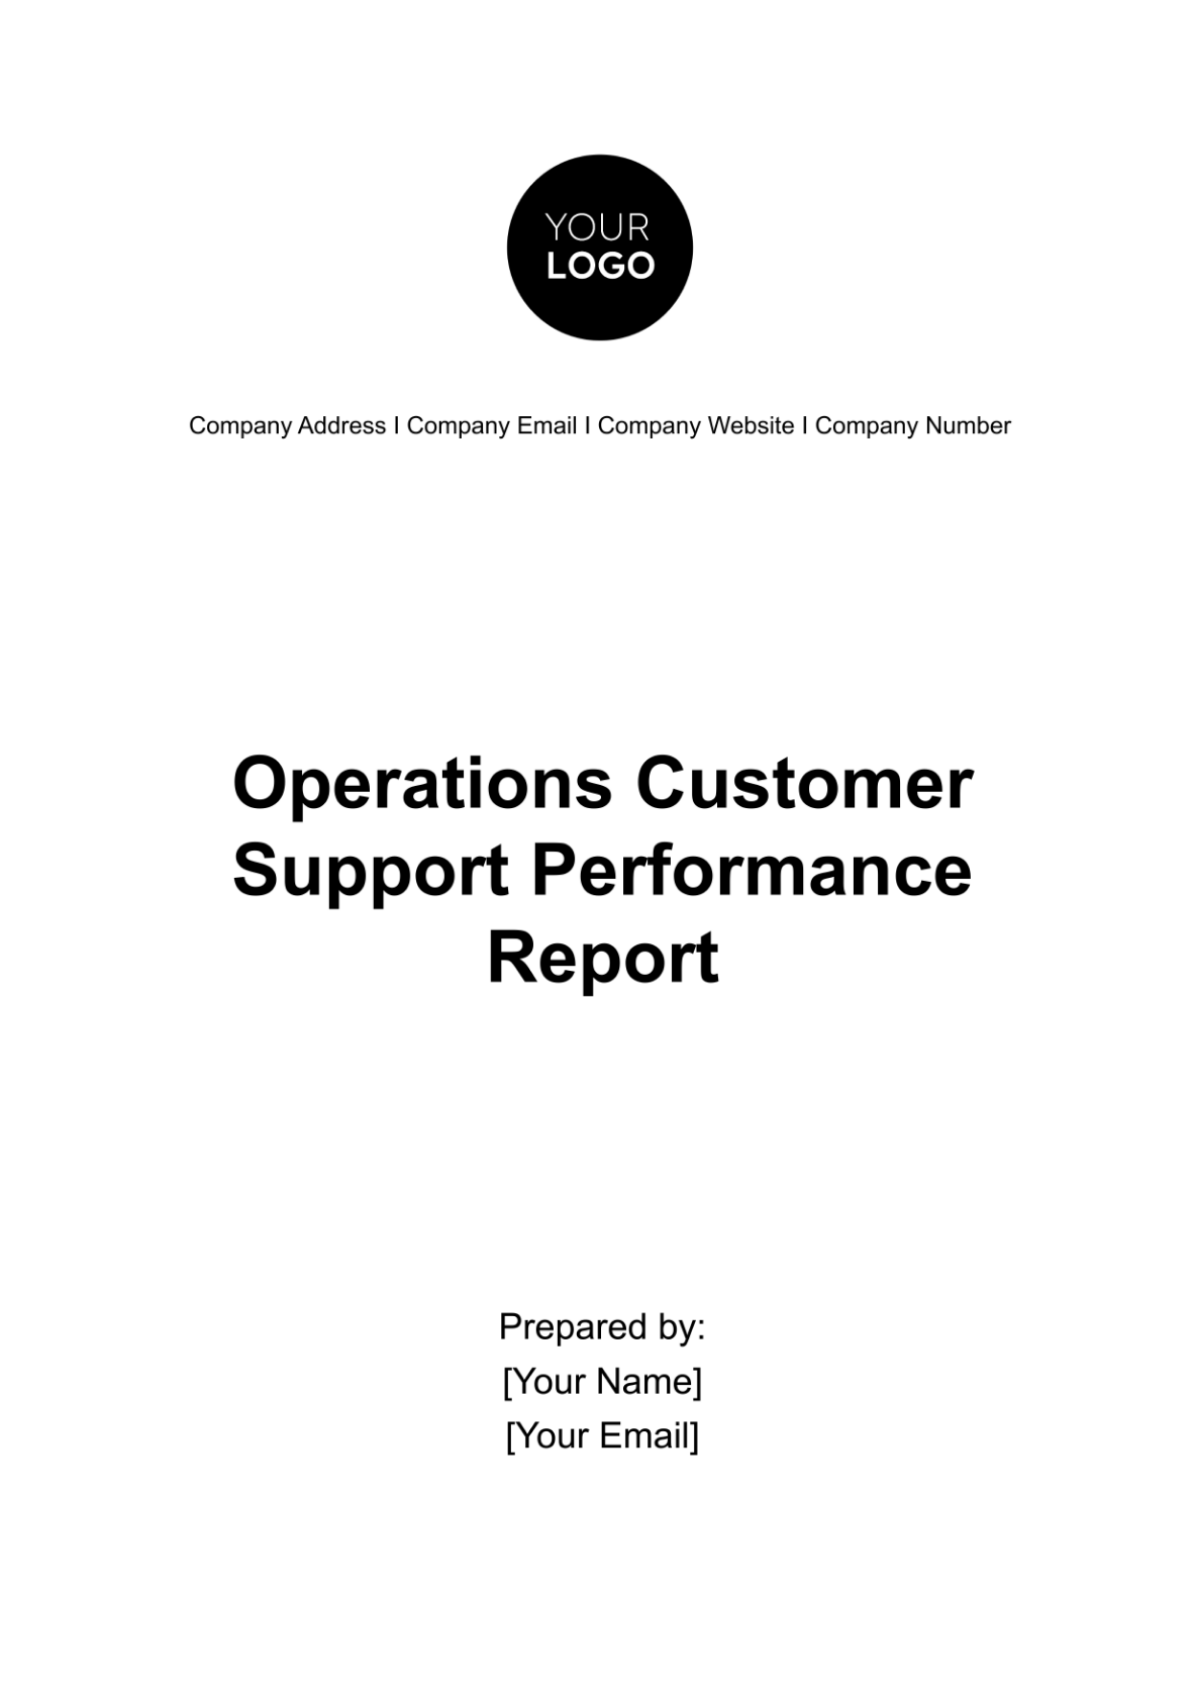 Operations Customer Support Performance Report Template